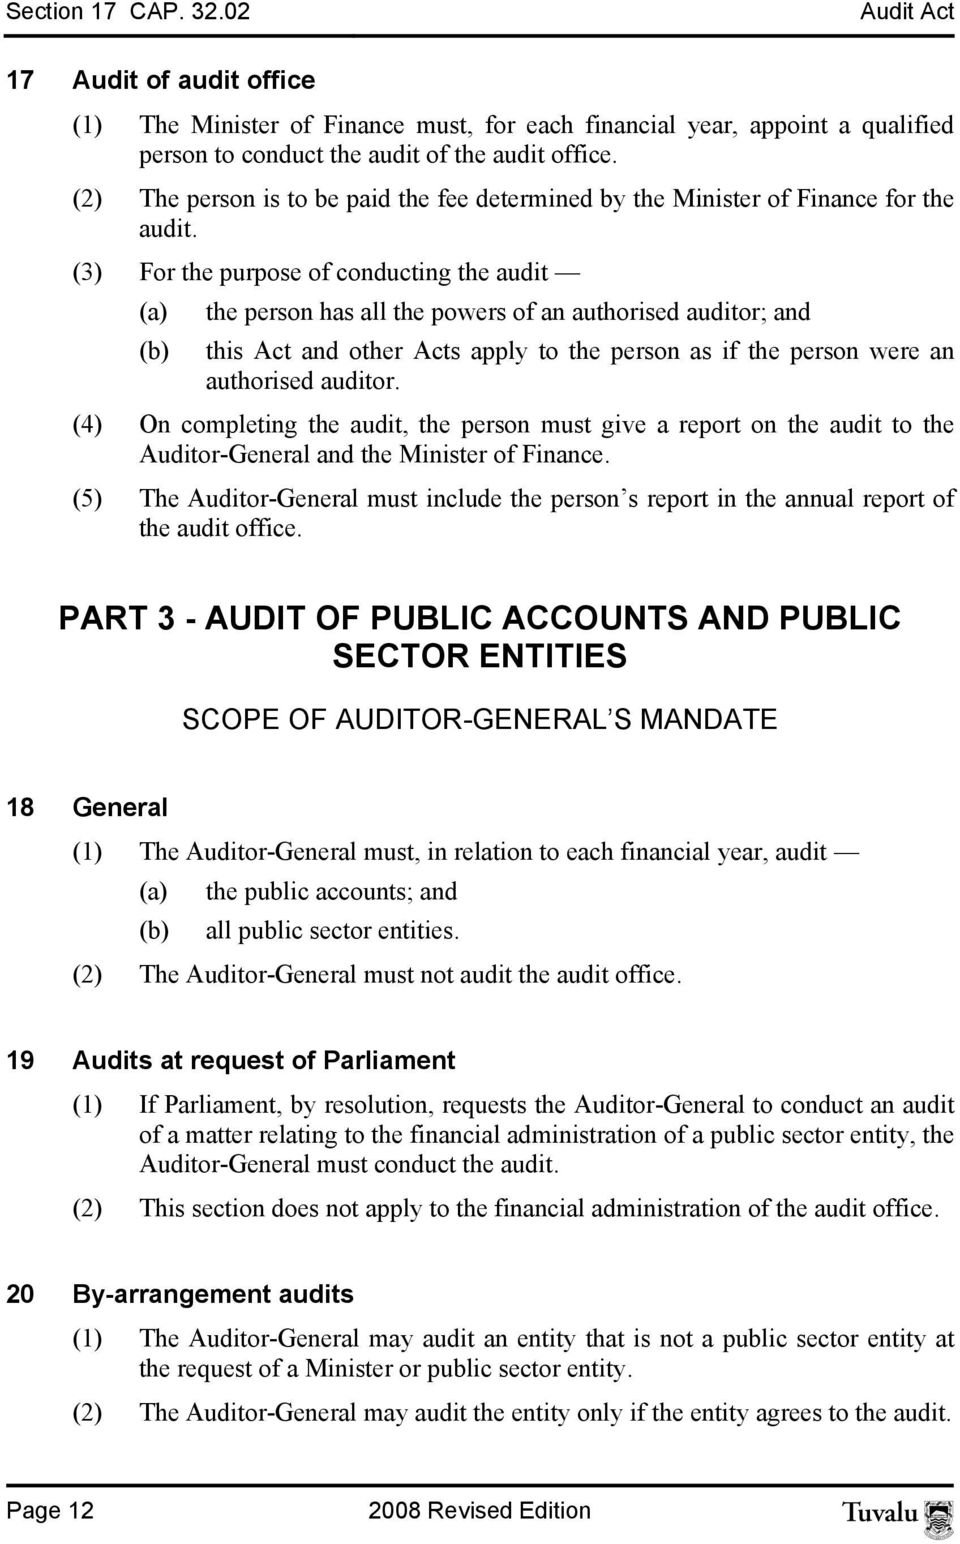 (3) For the purpose of conducting the audit (a) the person has all the powers of an authorised auditor; and (b) this Act and other Acts apply to the person as if the person were an authorised auditor.